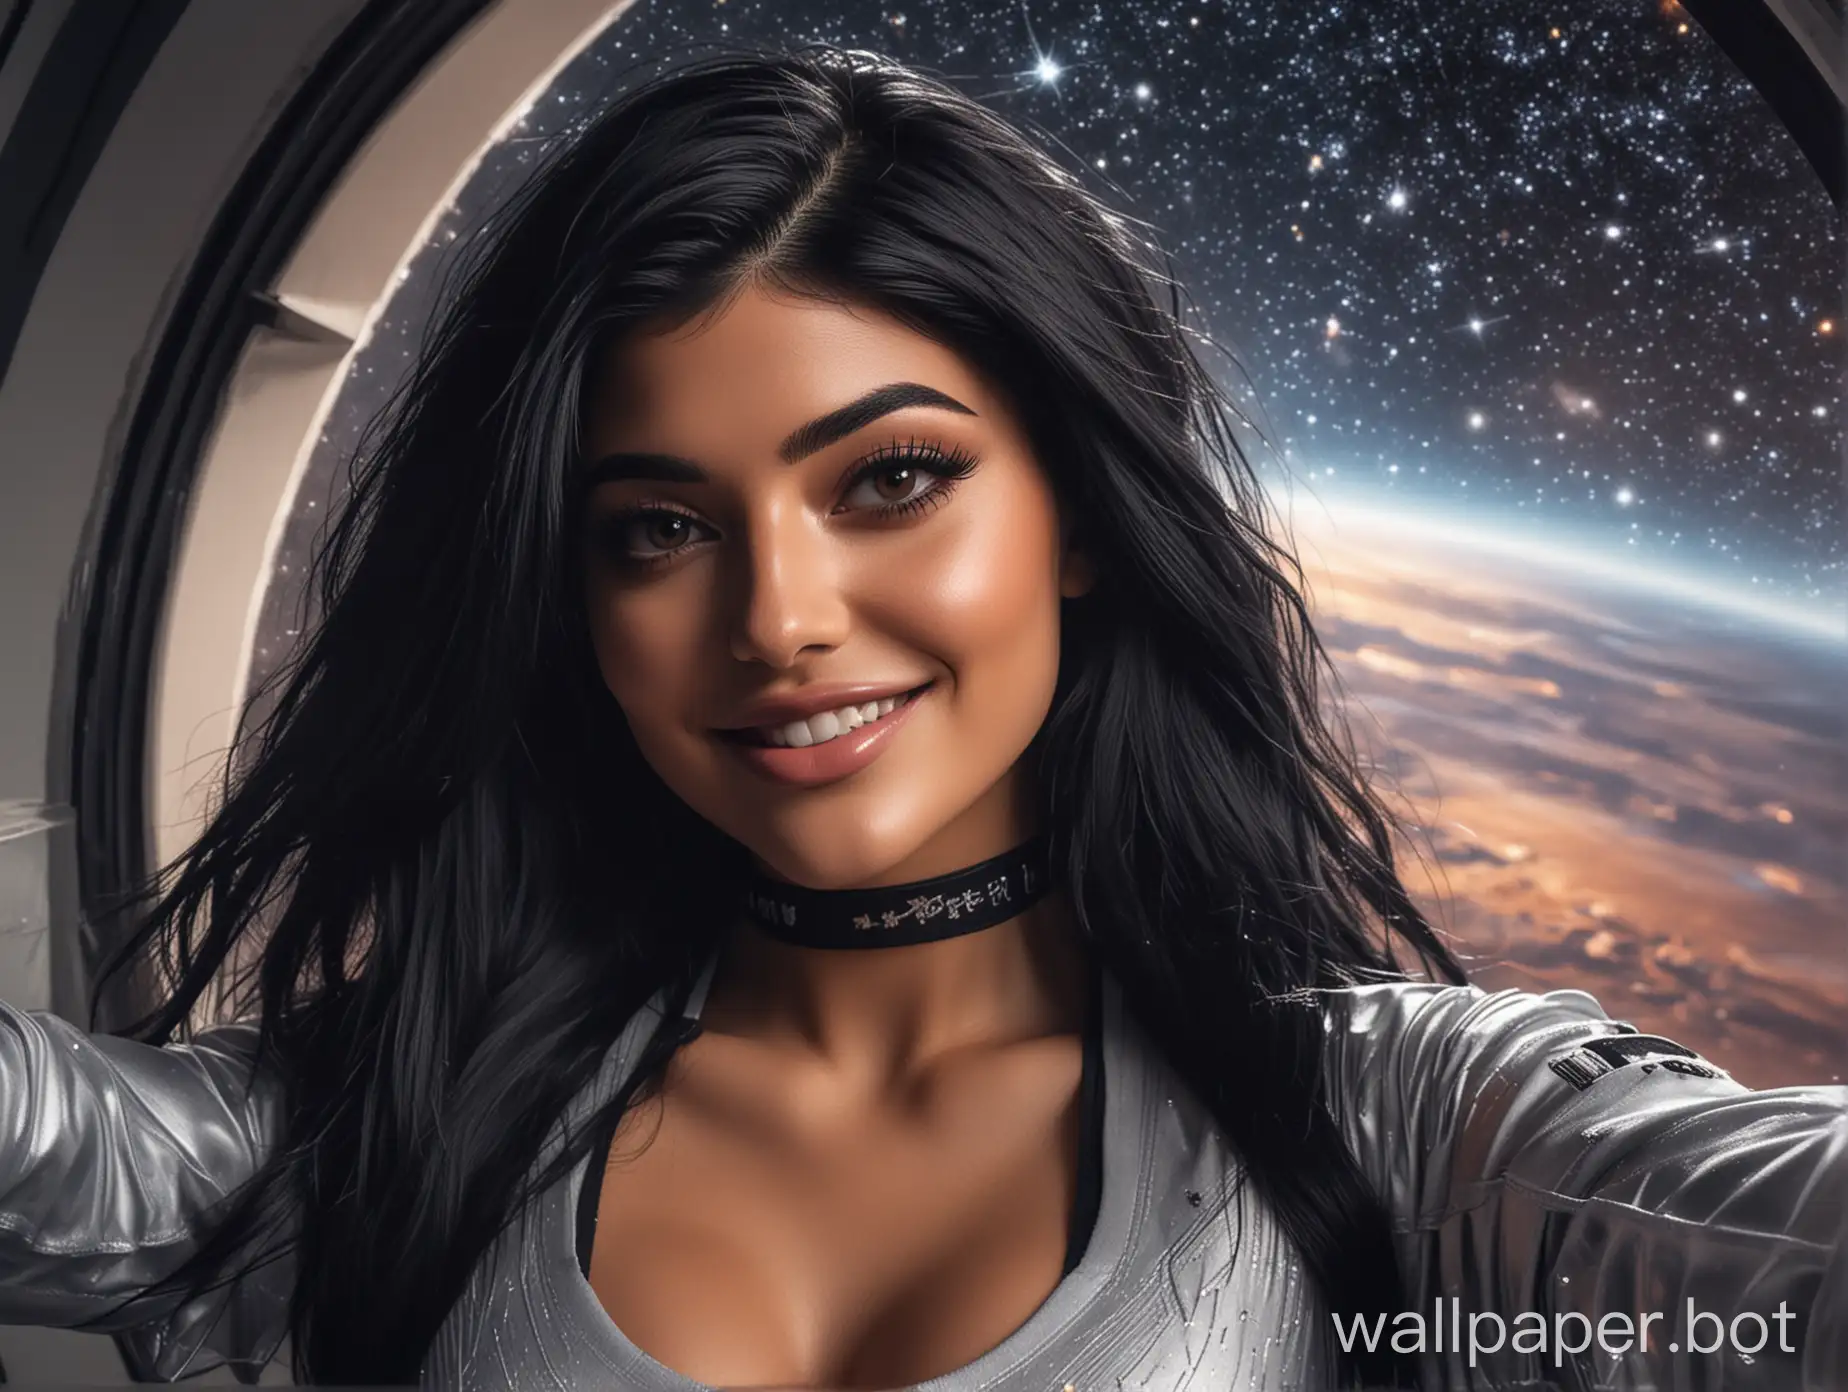 female with kylie jenner face taking selfie,  Science-Fiction, close-up headshot, Wear sporty cyberoutfit with cleavage , curvy female bodyshape, stars and planet through a window in the background, black shoulder long hair, natural black eyes, open smiling with showing teeth, over-the-shoulder shot